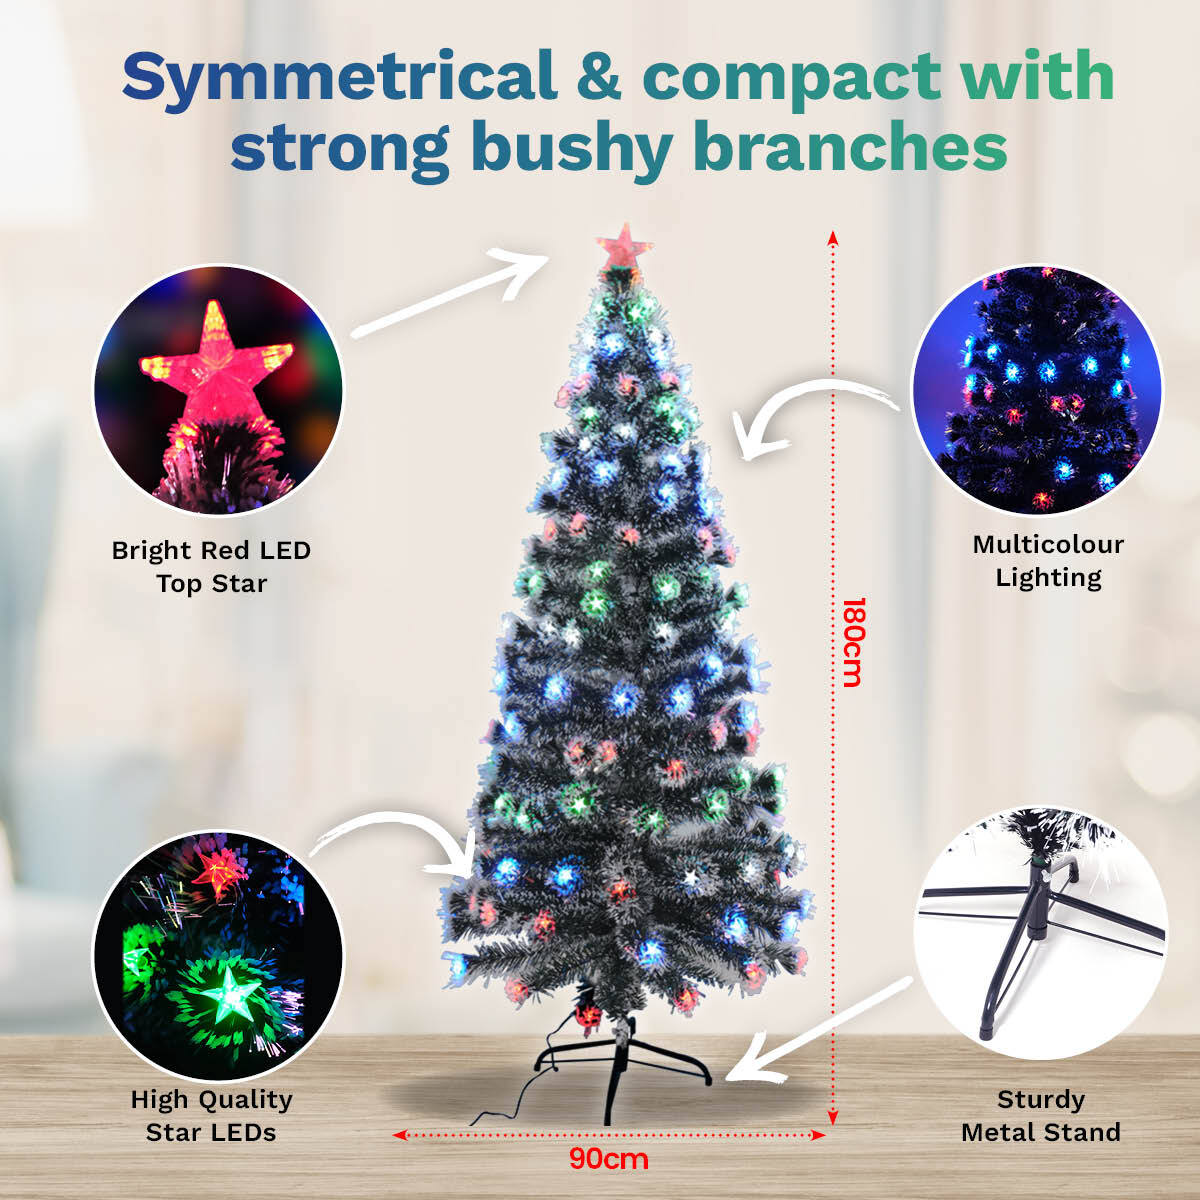 Christmas By Sas 1.8m Pine Tree 210 Multi-Colour LED Lights With 8 Functions Deals499